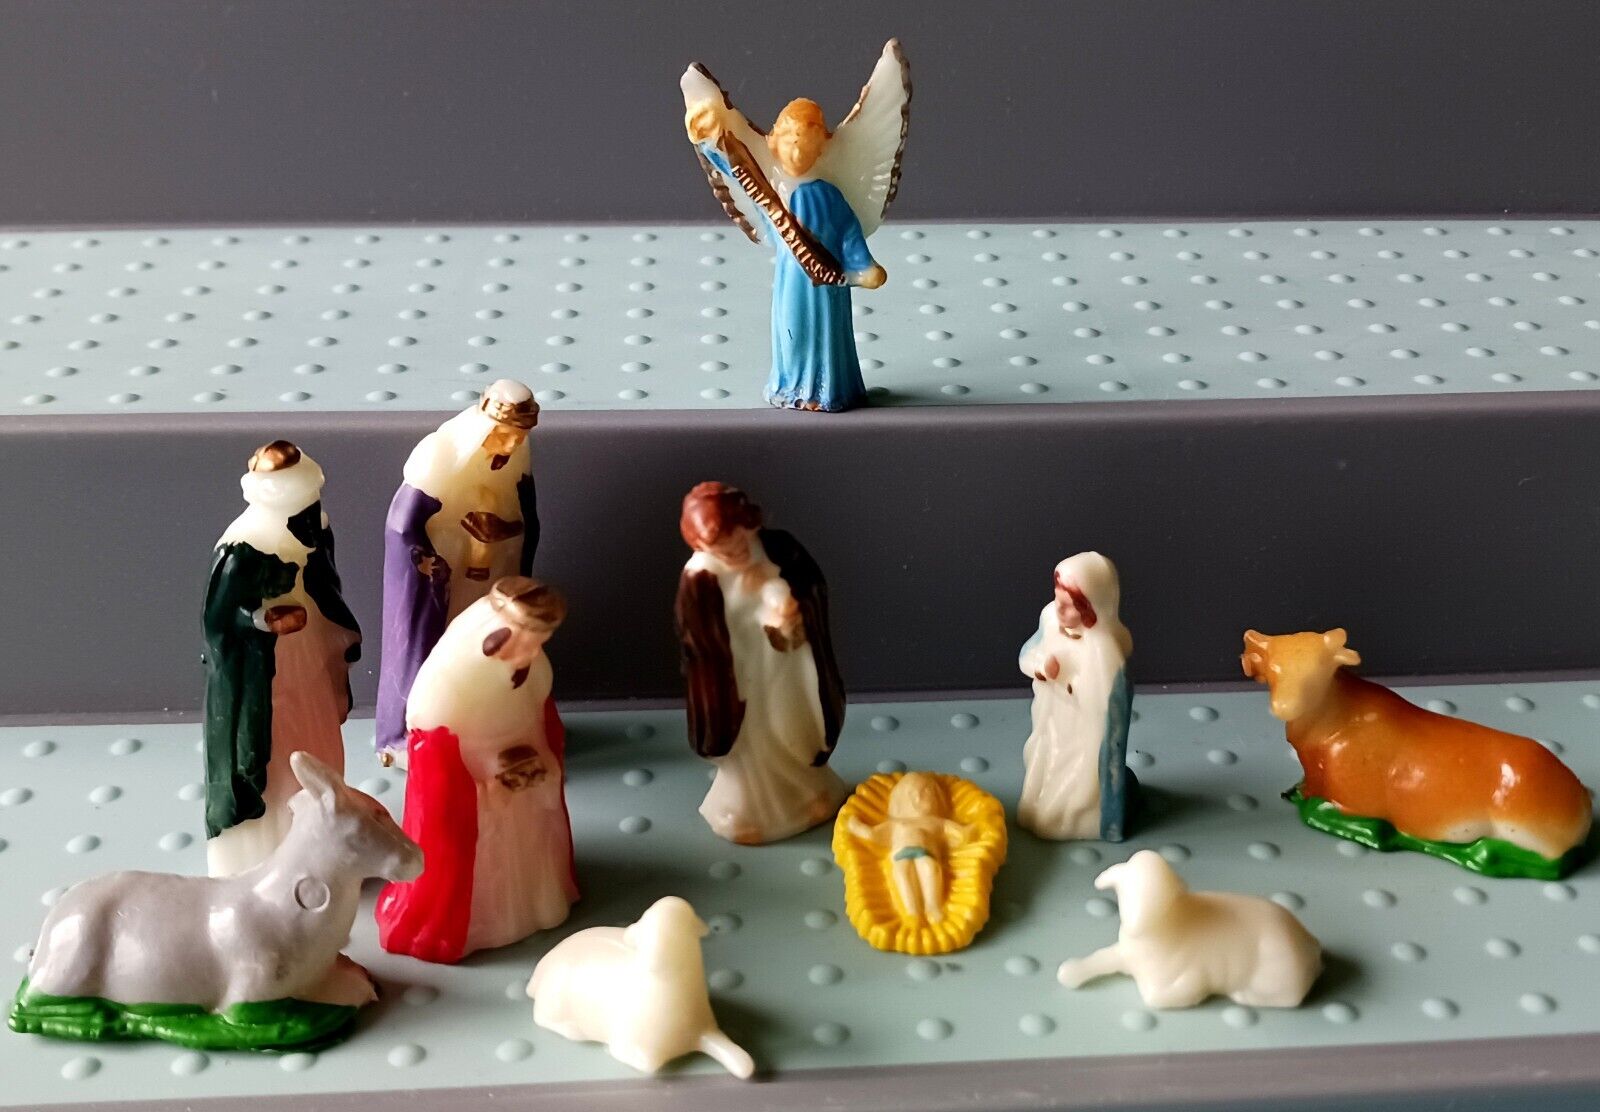 Lot Of 12 VTG Hard Plastic Mini Nativity Christmas Figures For Diorama Or Crafts